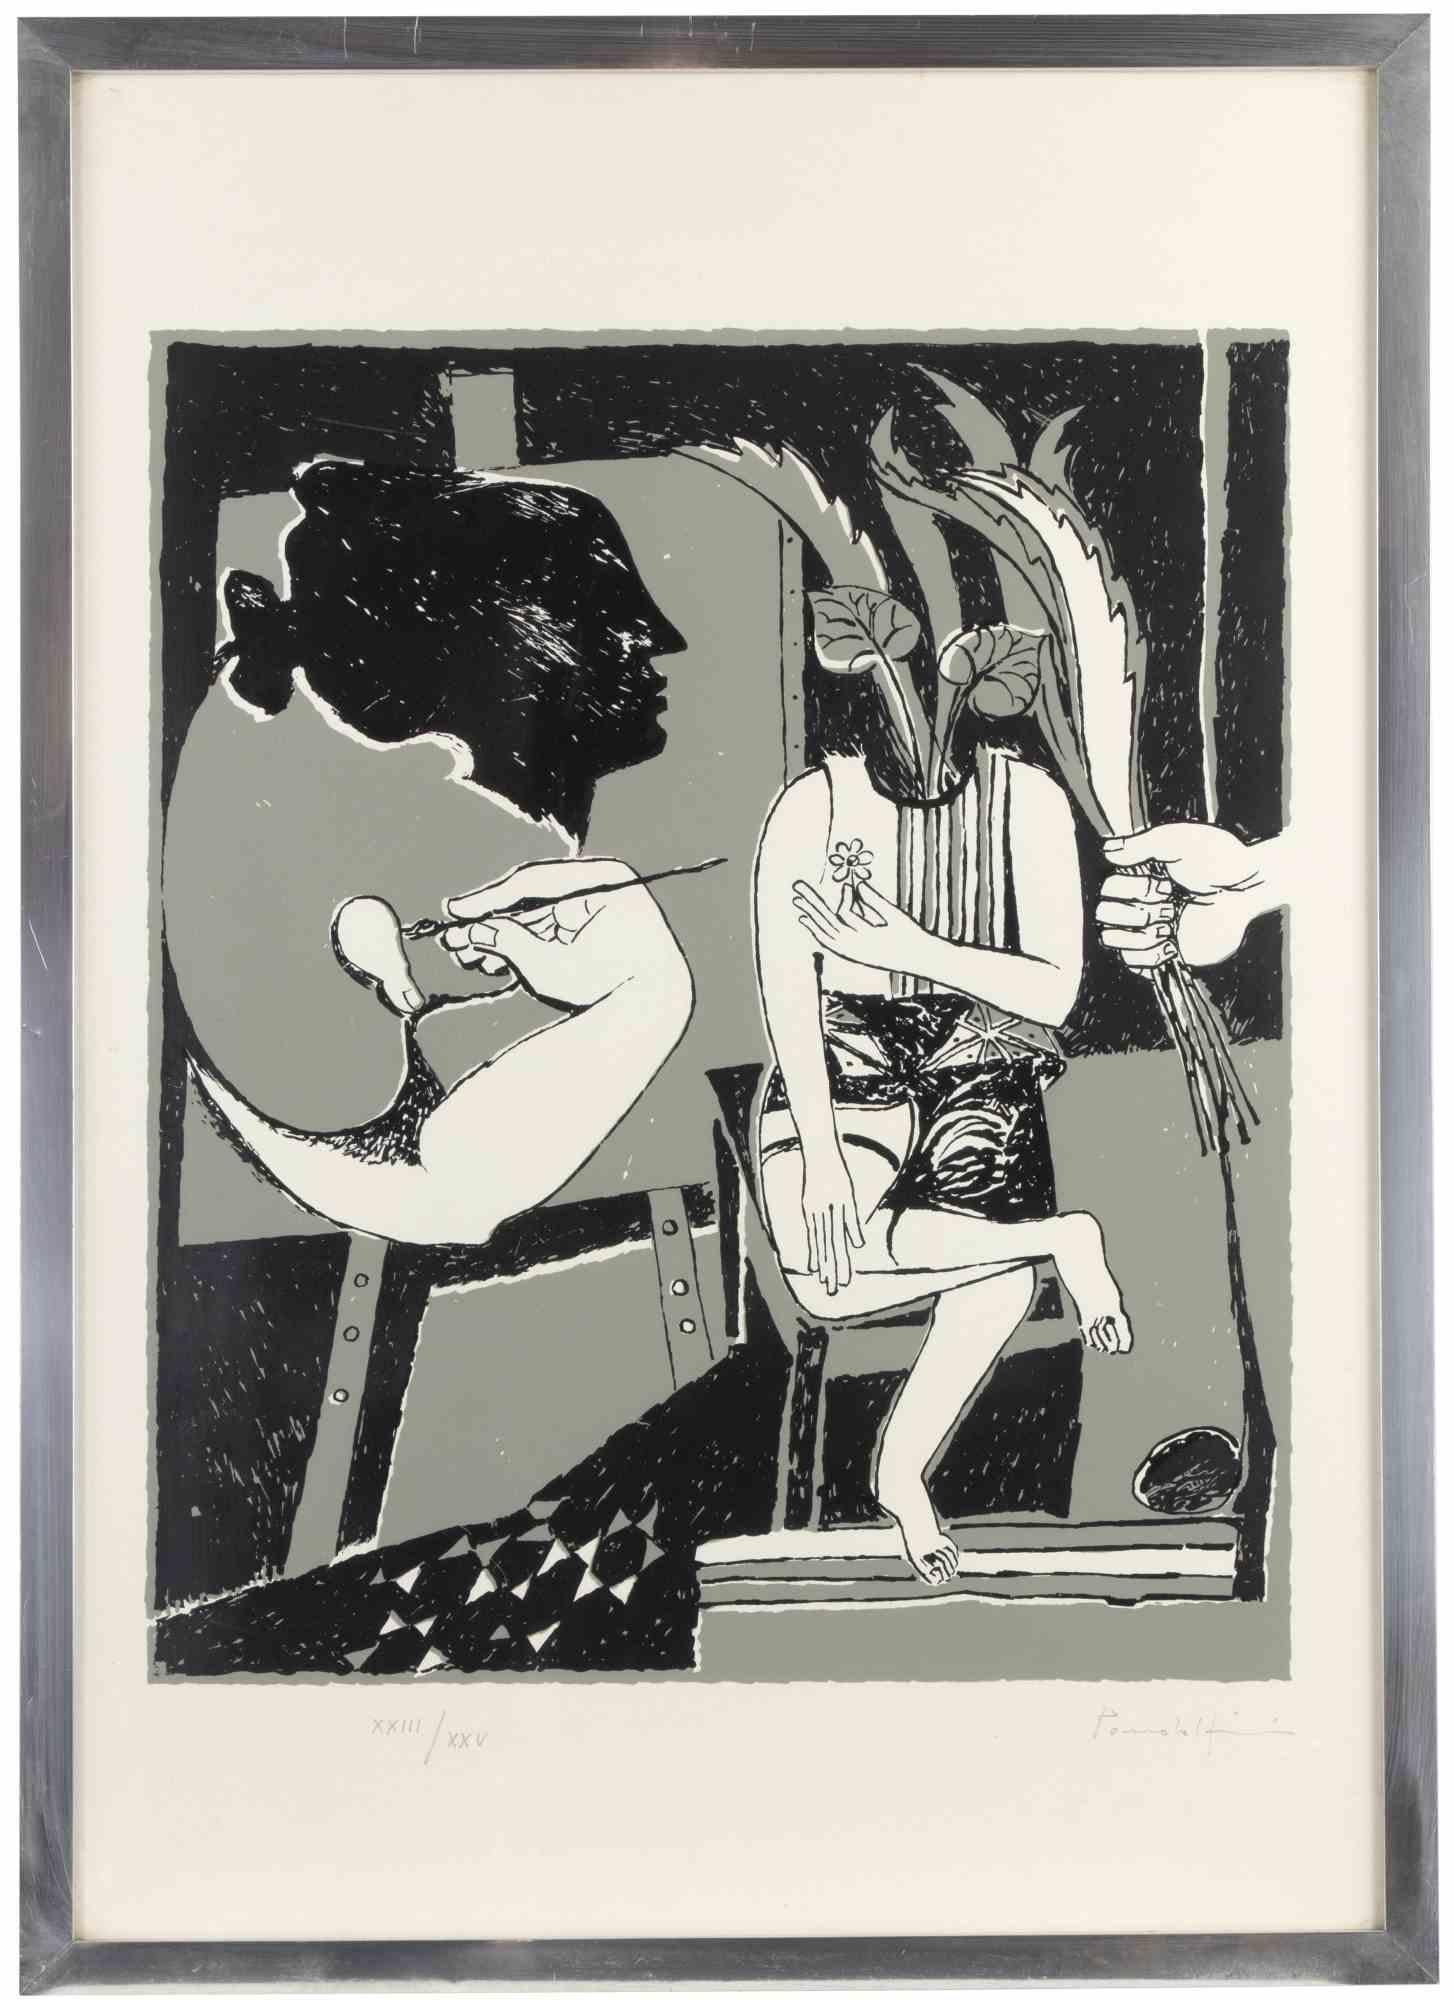 Figures is a contemporary artwork realized by Emanuele Pandolfini in 1970s.

Lithograph on paper.

Hand signed and numbered on the lower margin.

Edition of XXIII/XXV

Includes frame